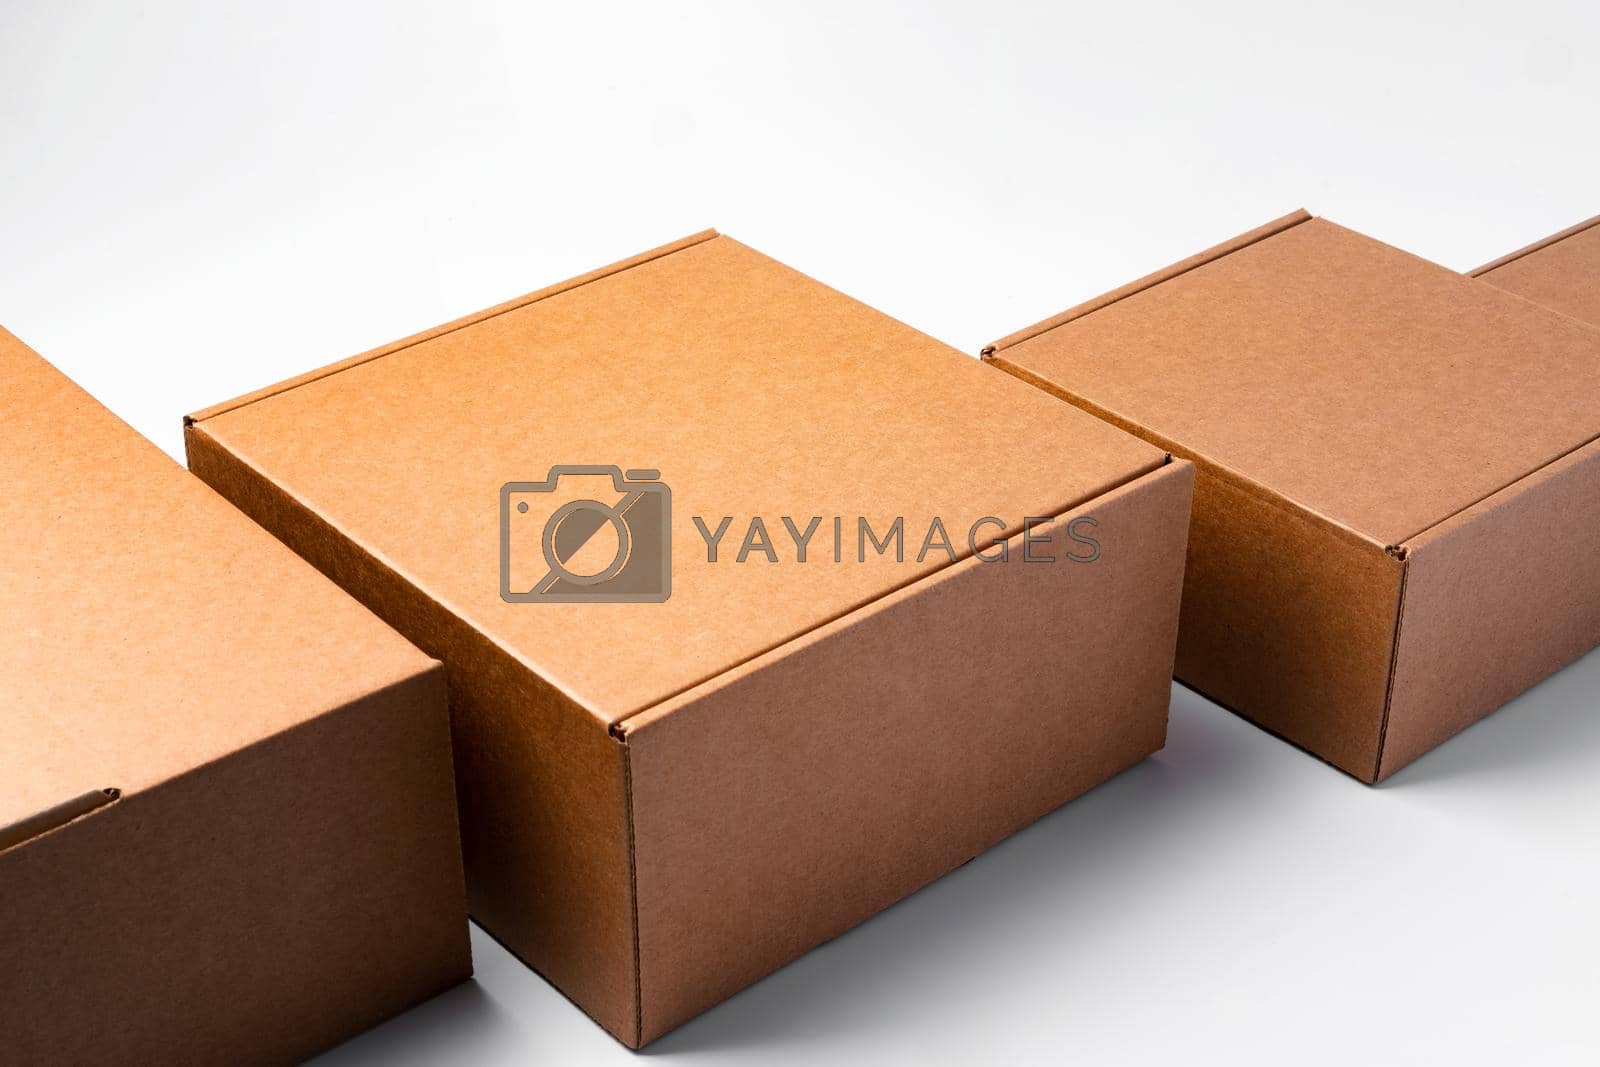 Royalty free image of Lot of cardboard boxes on white background by Fabrikasimf